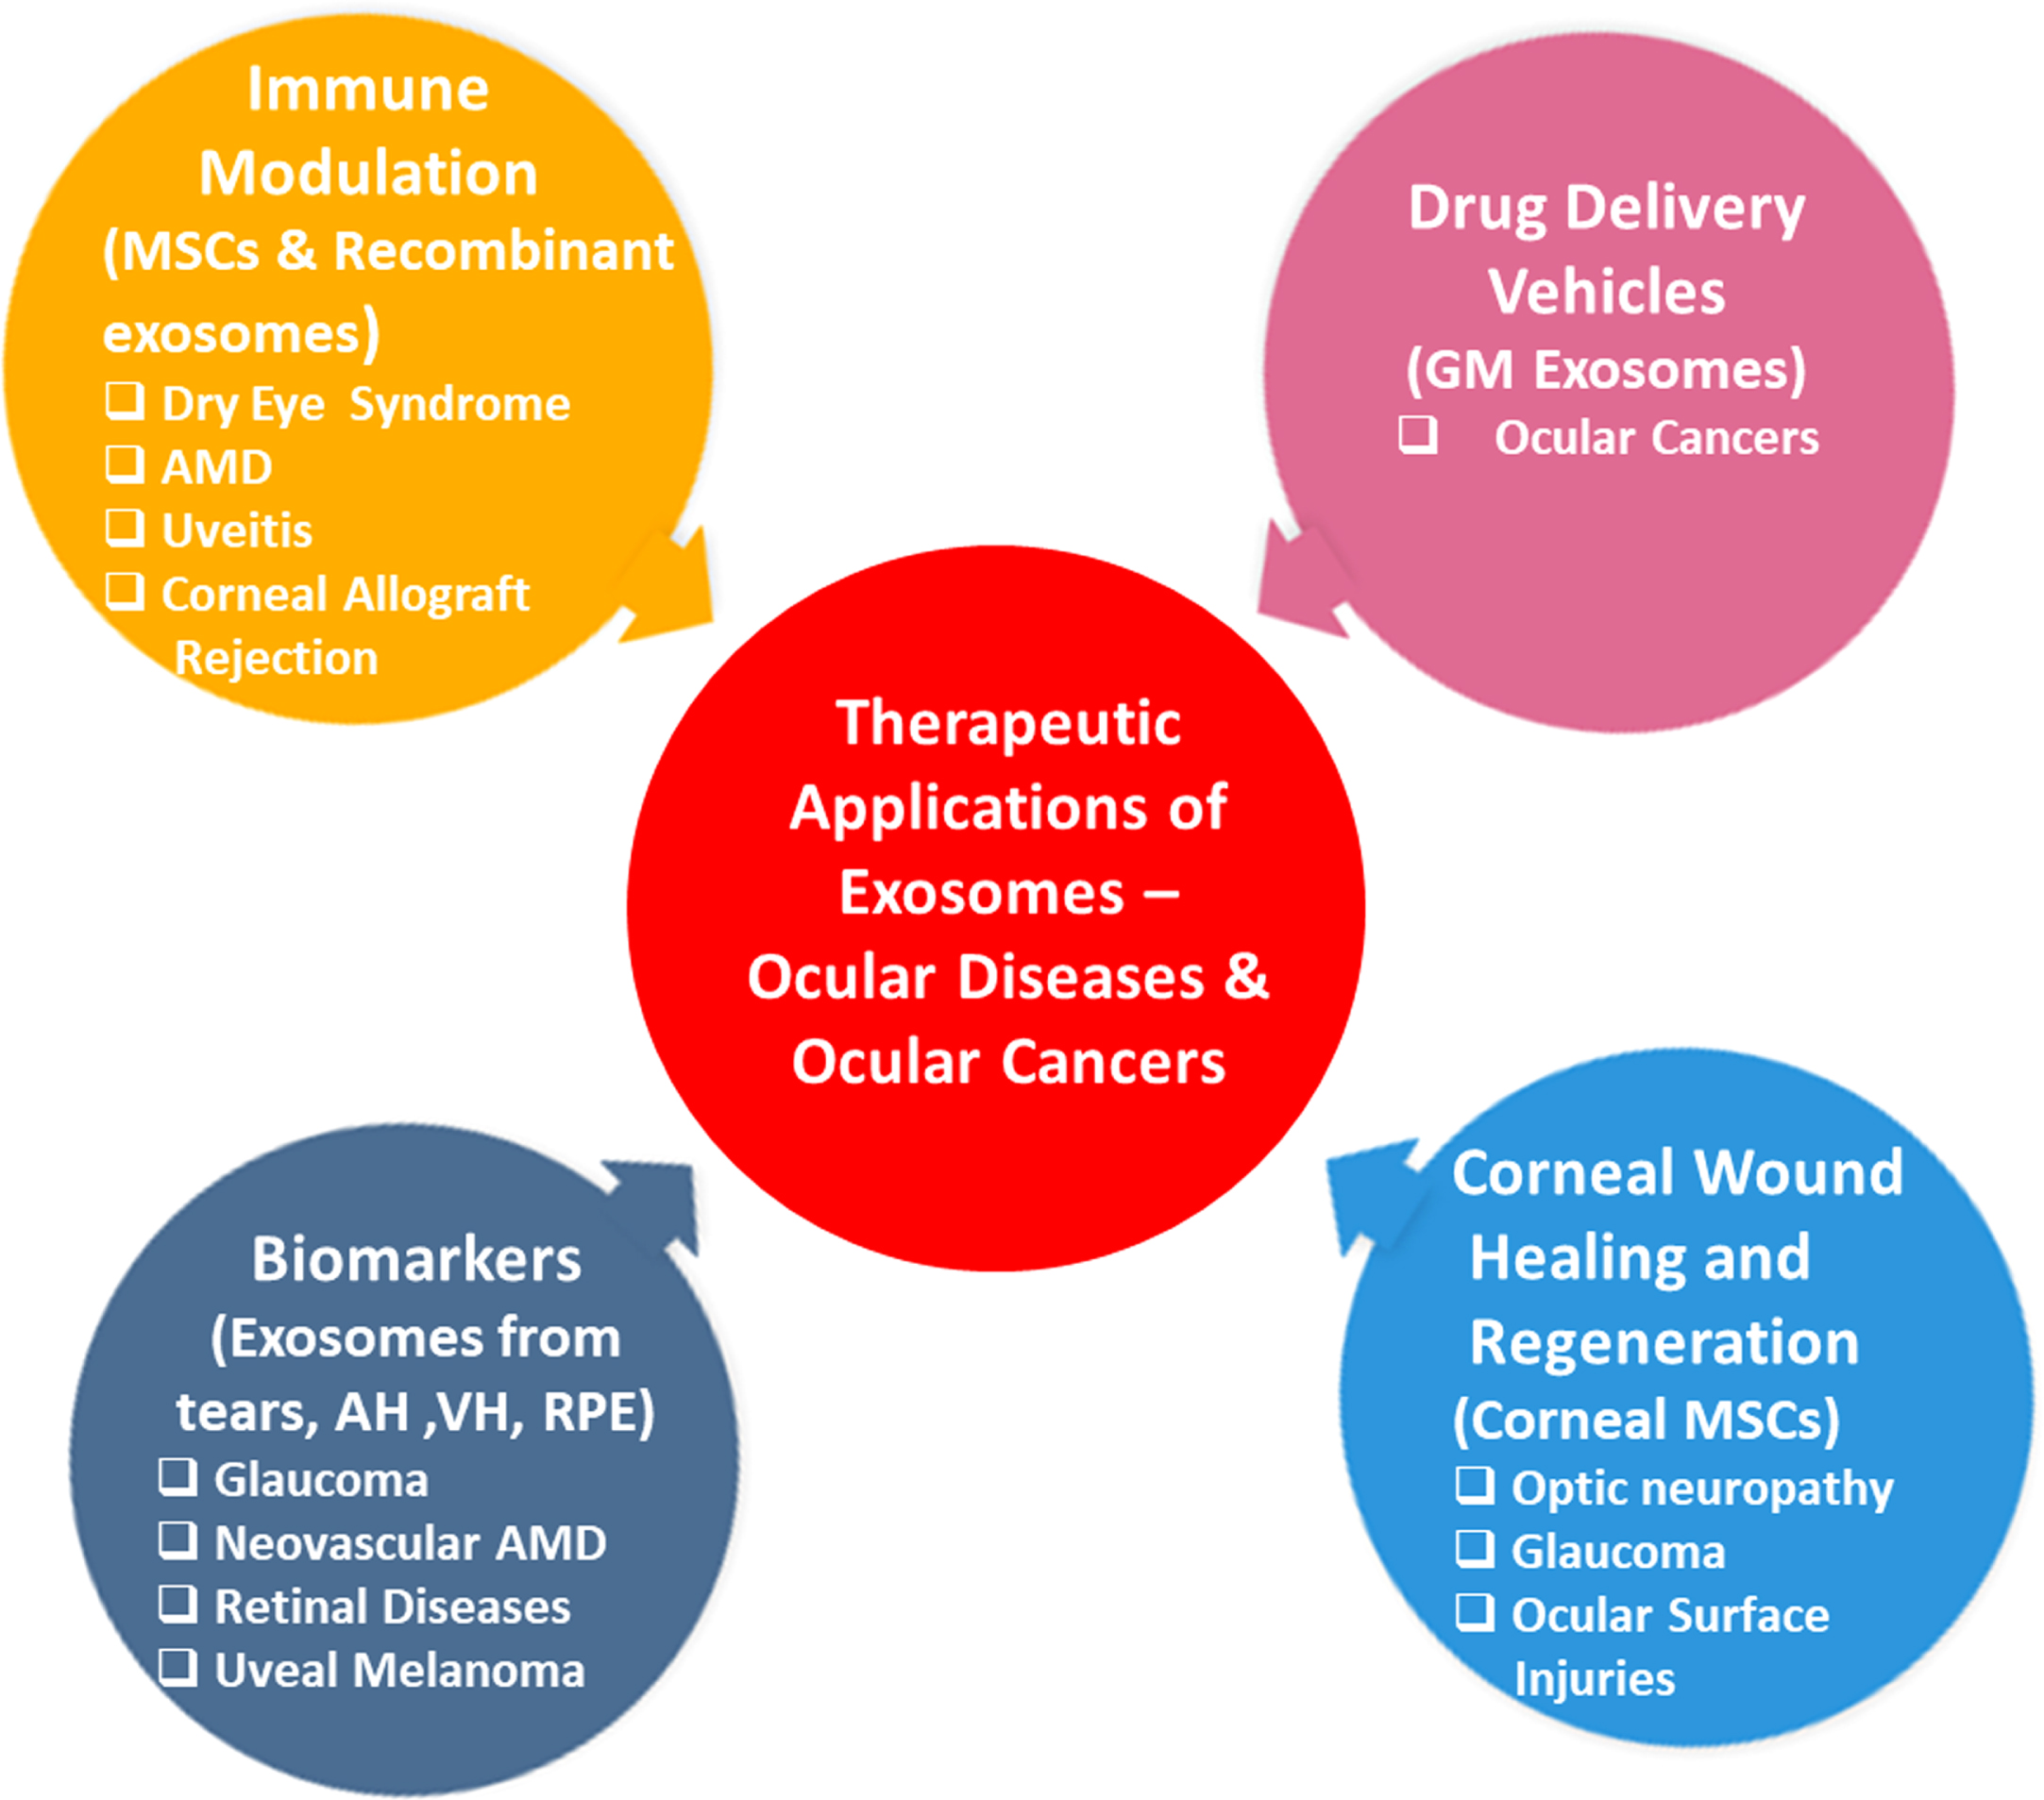 Therapeutic Applications of Exosomes.